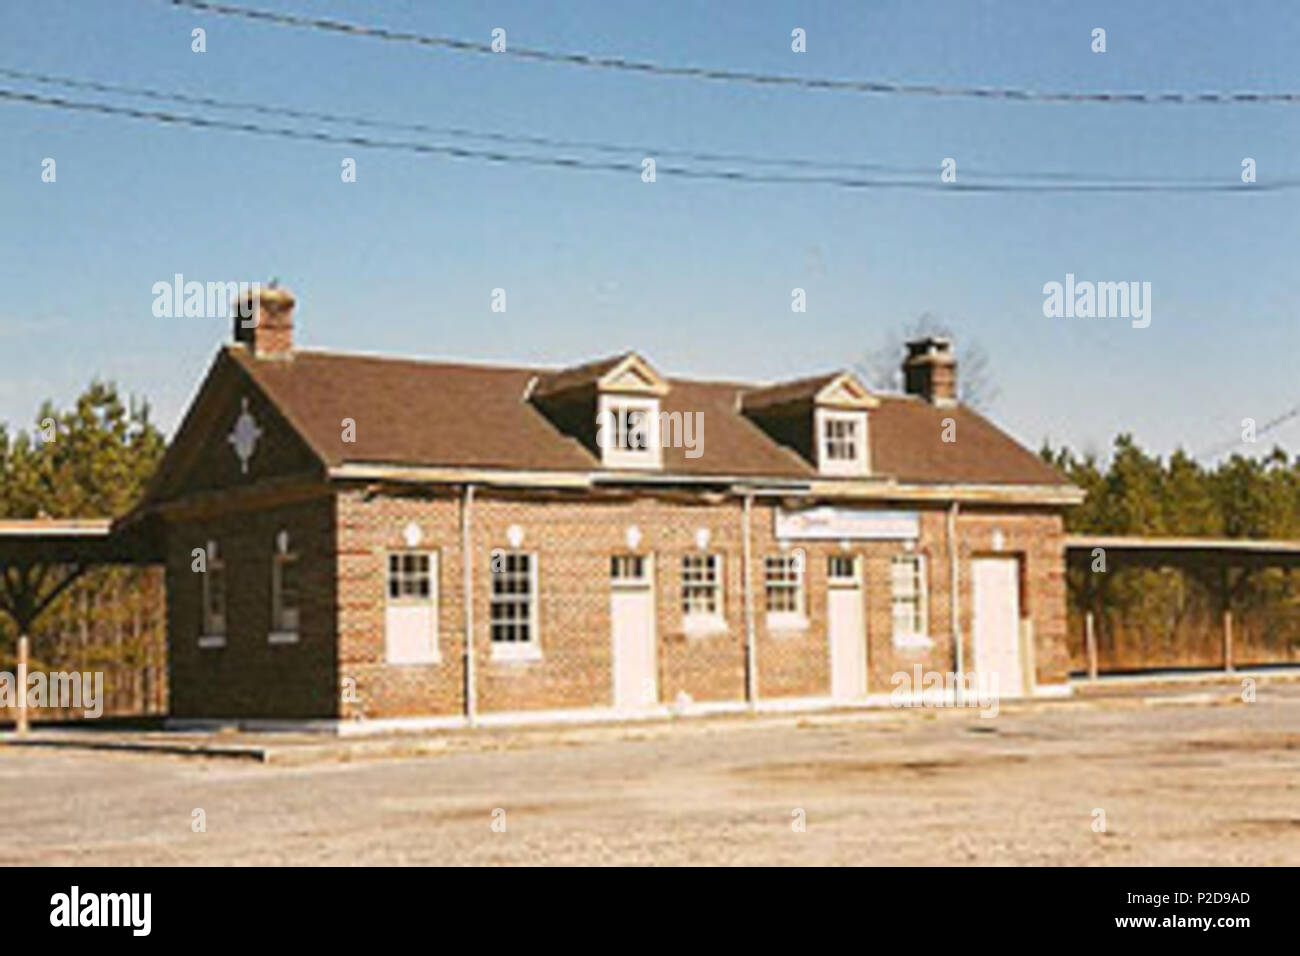 . English: The Amtrak station in South Carolina. It was originally built in 1937 by the Seaboard Air Line Railroad. 16 February 2002. Hikki Nagasaki 11 Camden South Carolina Amtrak station Stock Photo